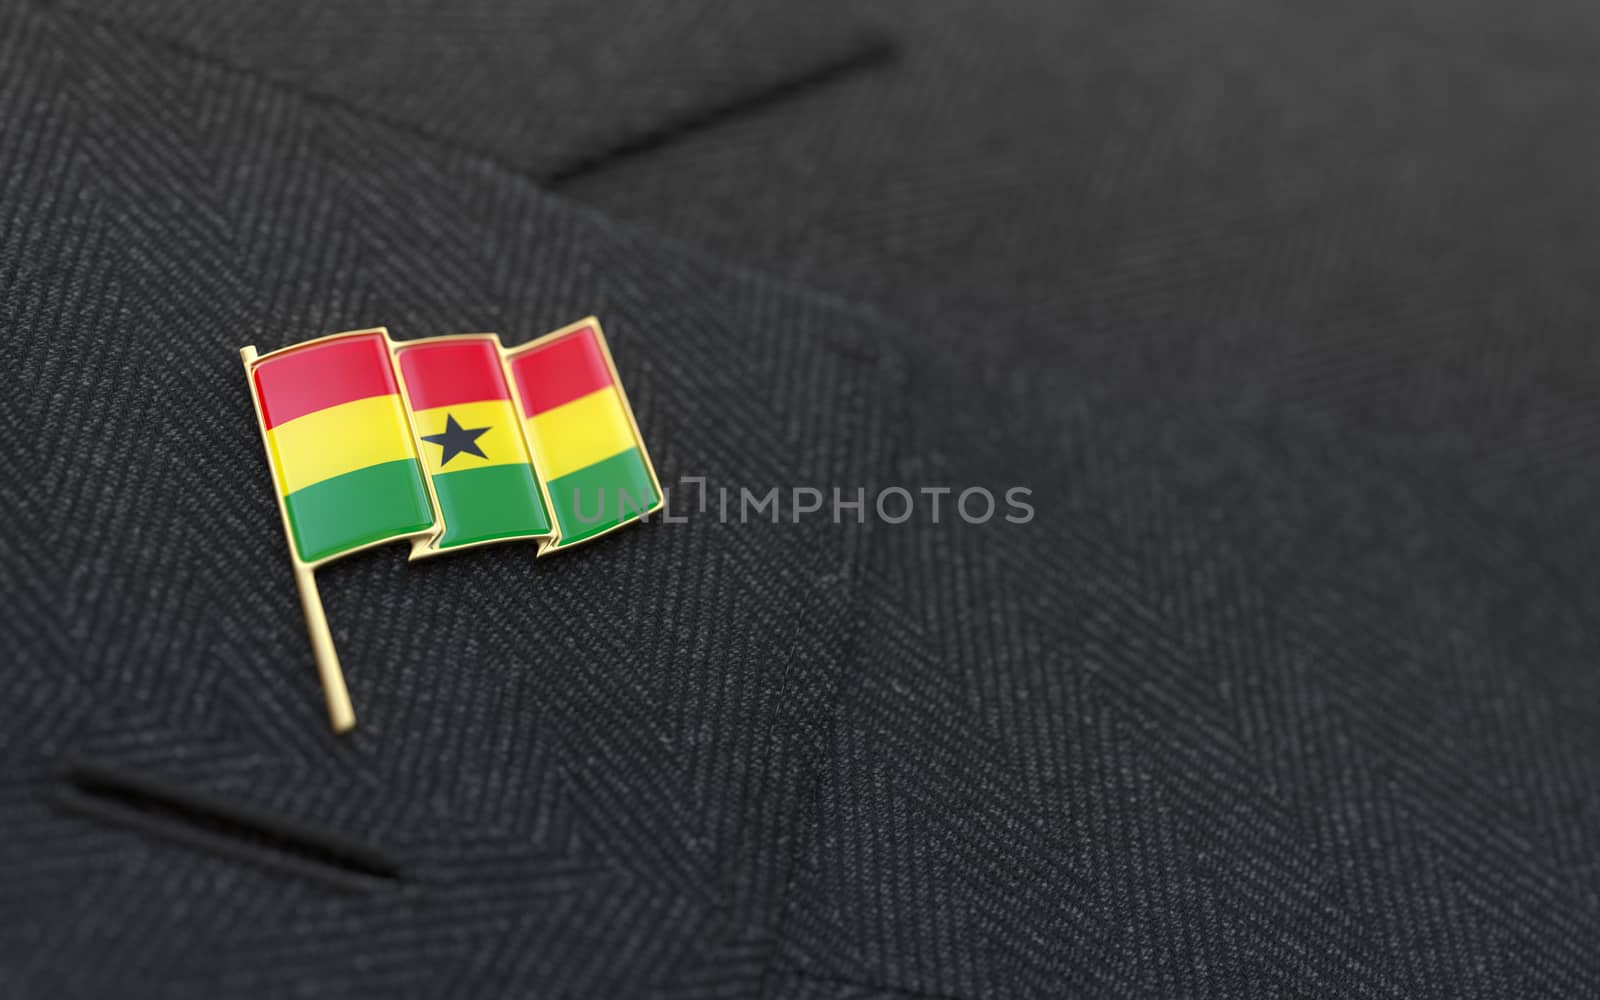 Ghana flag lapel pin on the collar of a business suit jacket shows patriotism